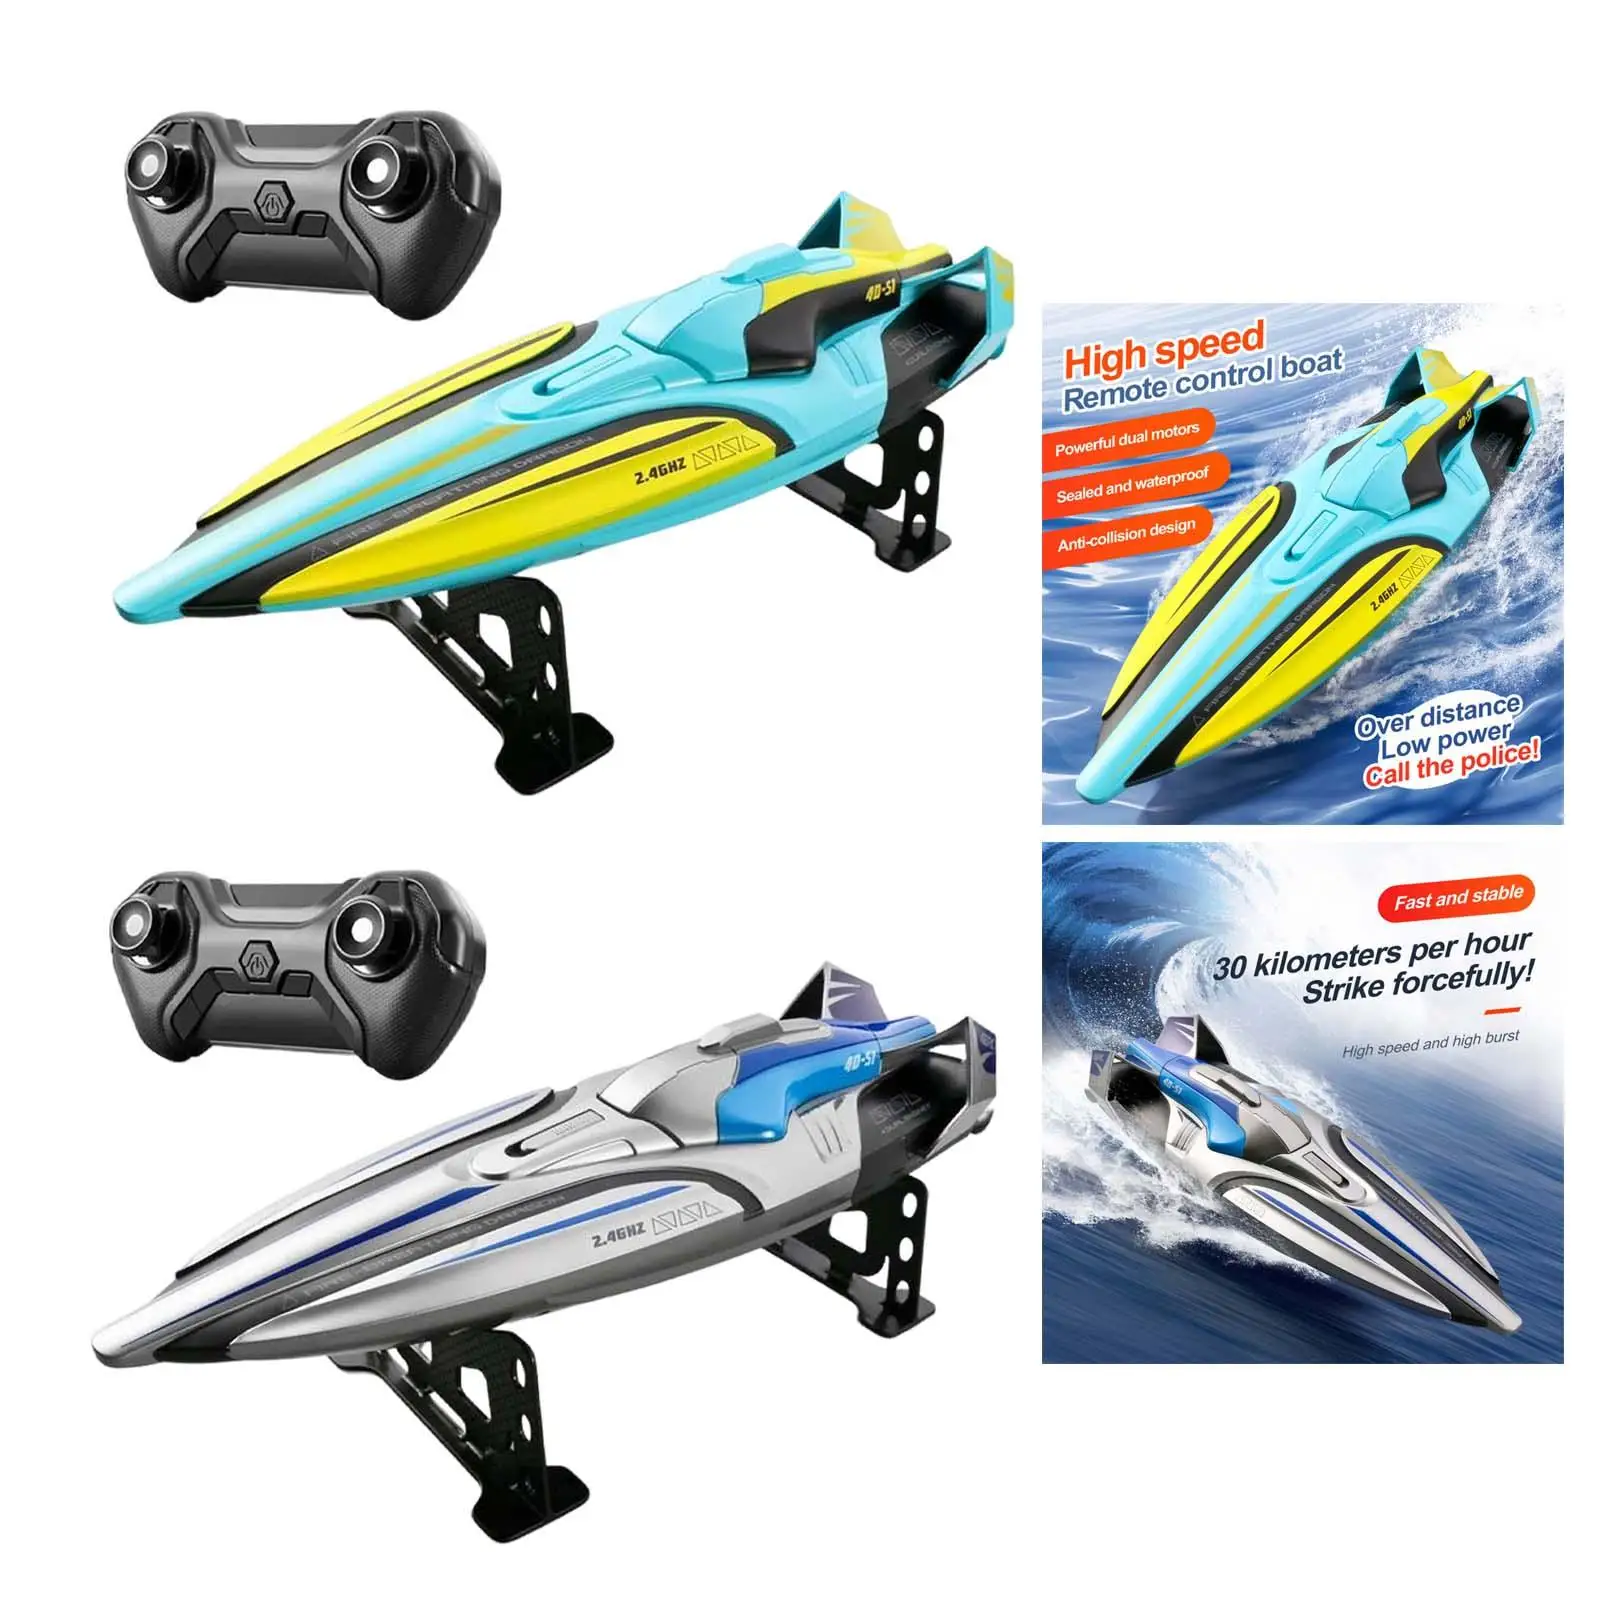 2.4G RC Boats 800mAh Dural Motor Backward Kids Play Toy High Speed Left and Right Waterproof with Light for Adults Holiday Gifts